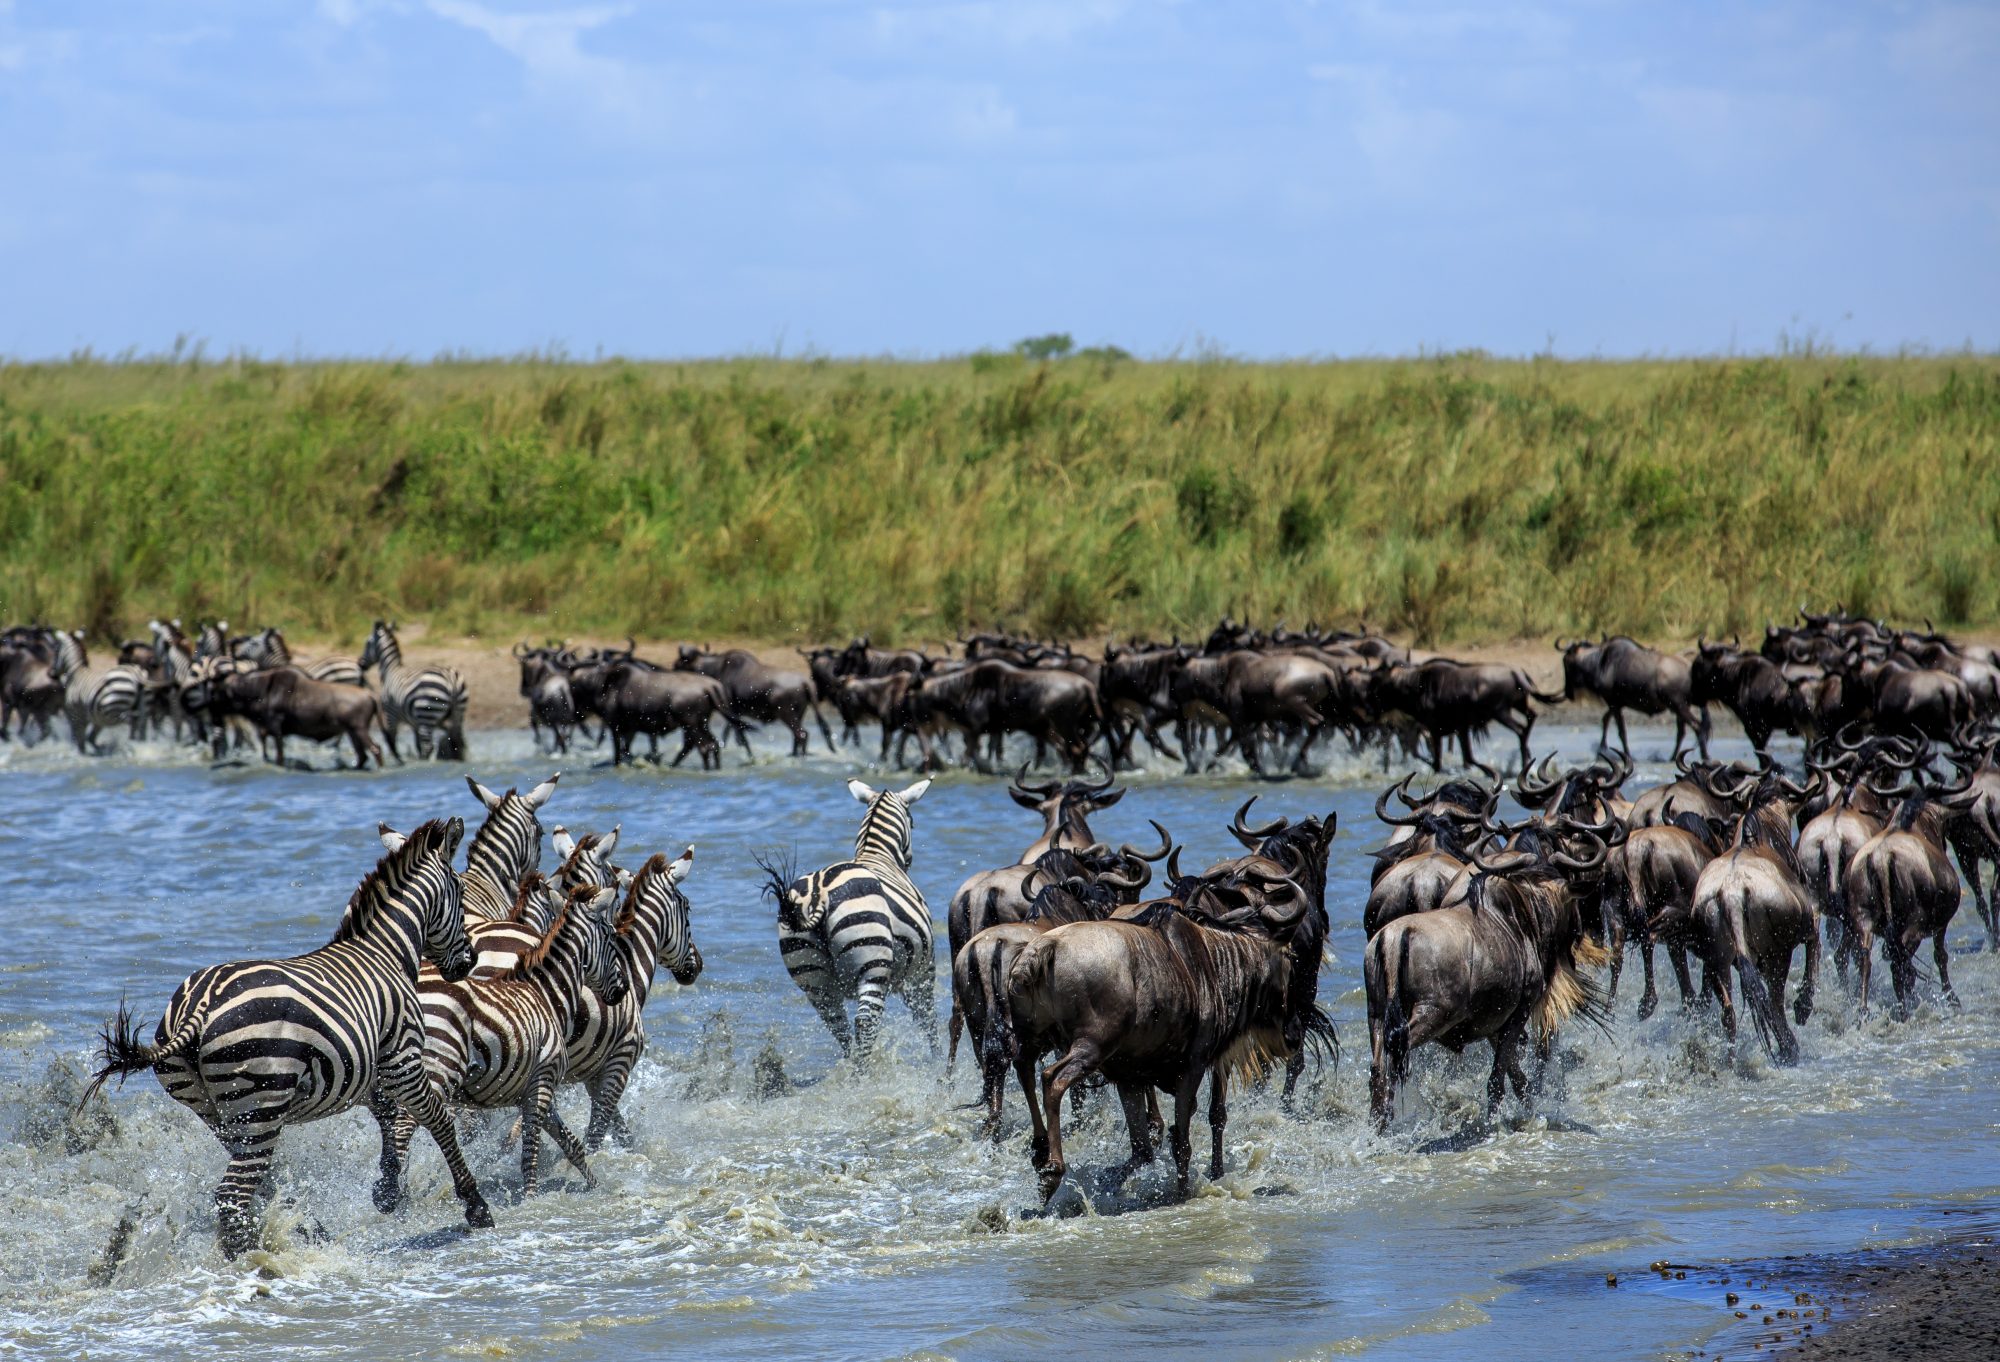 Wildlife migrations are collapsing in East Africa